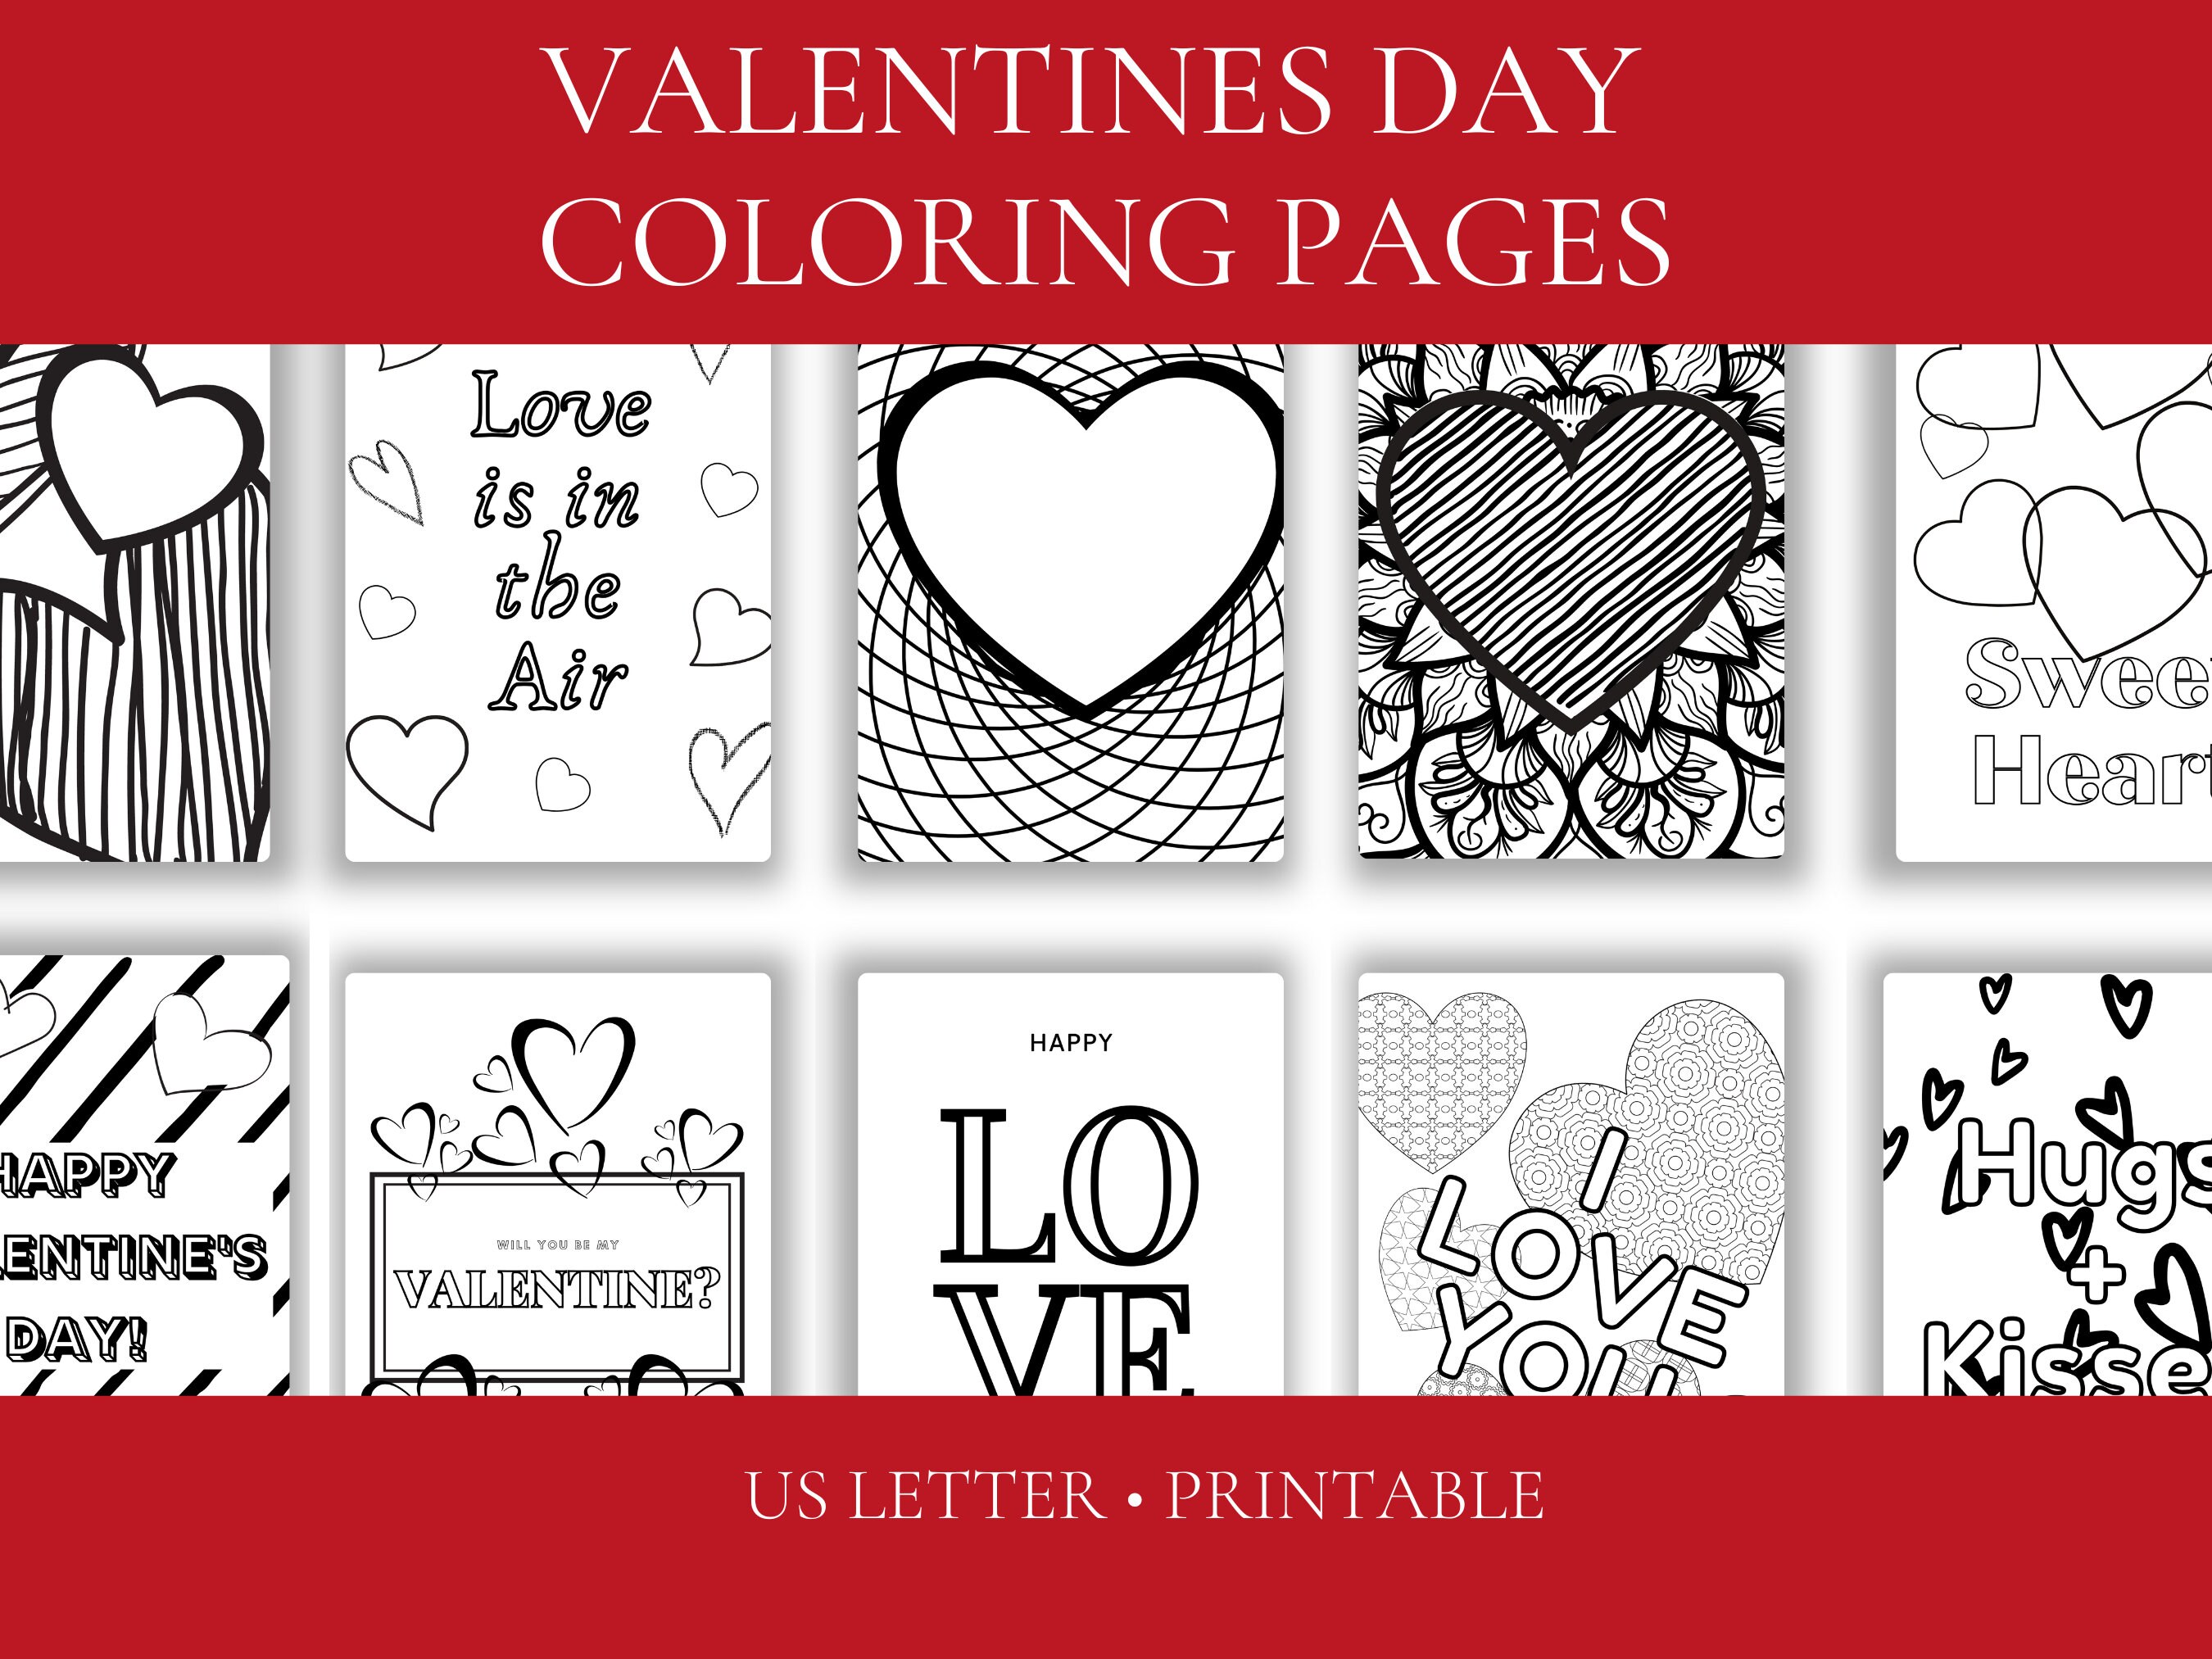 Printable valentines day coloring pages for adults and